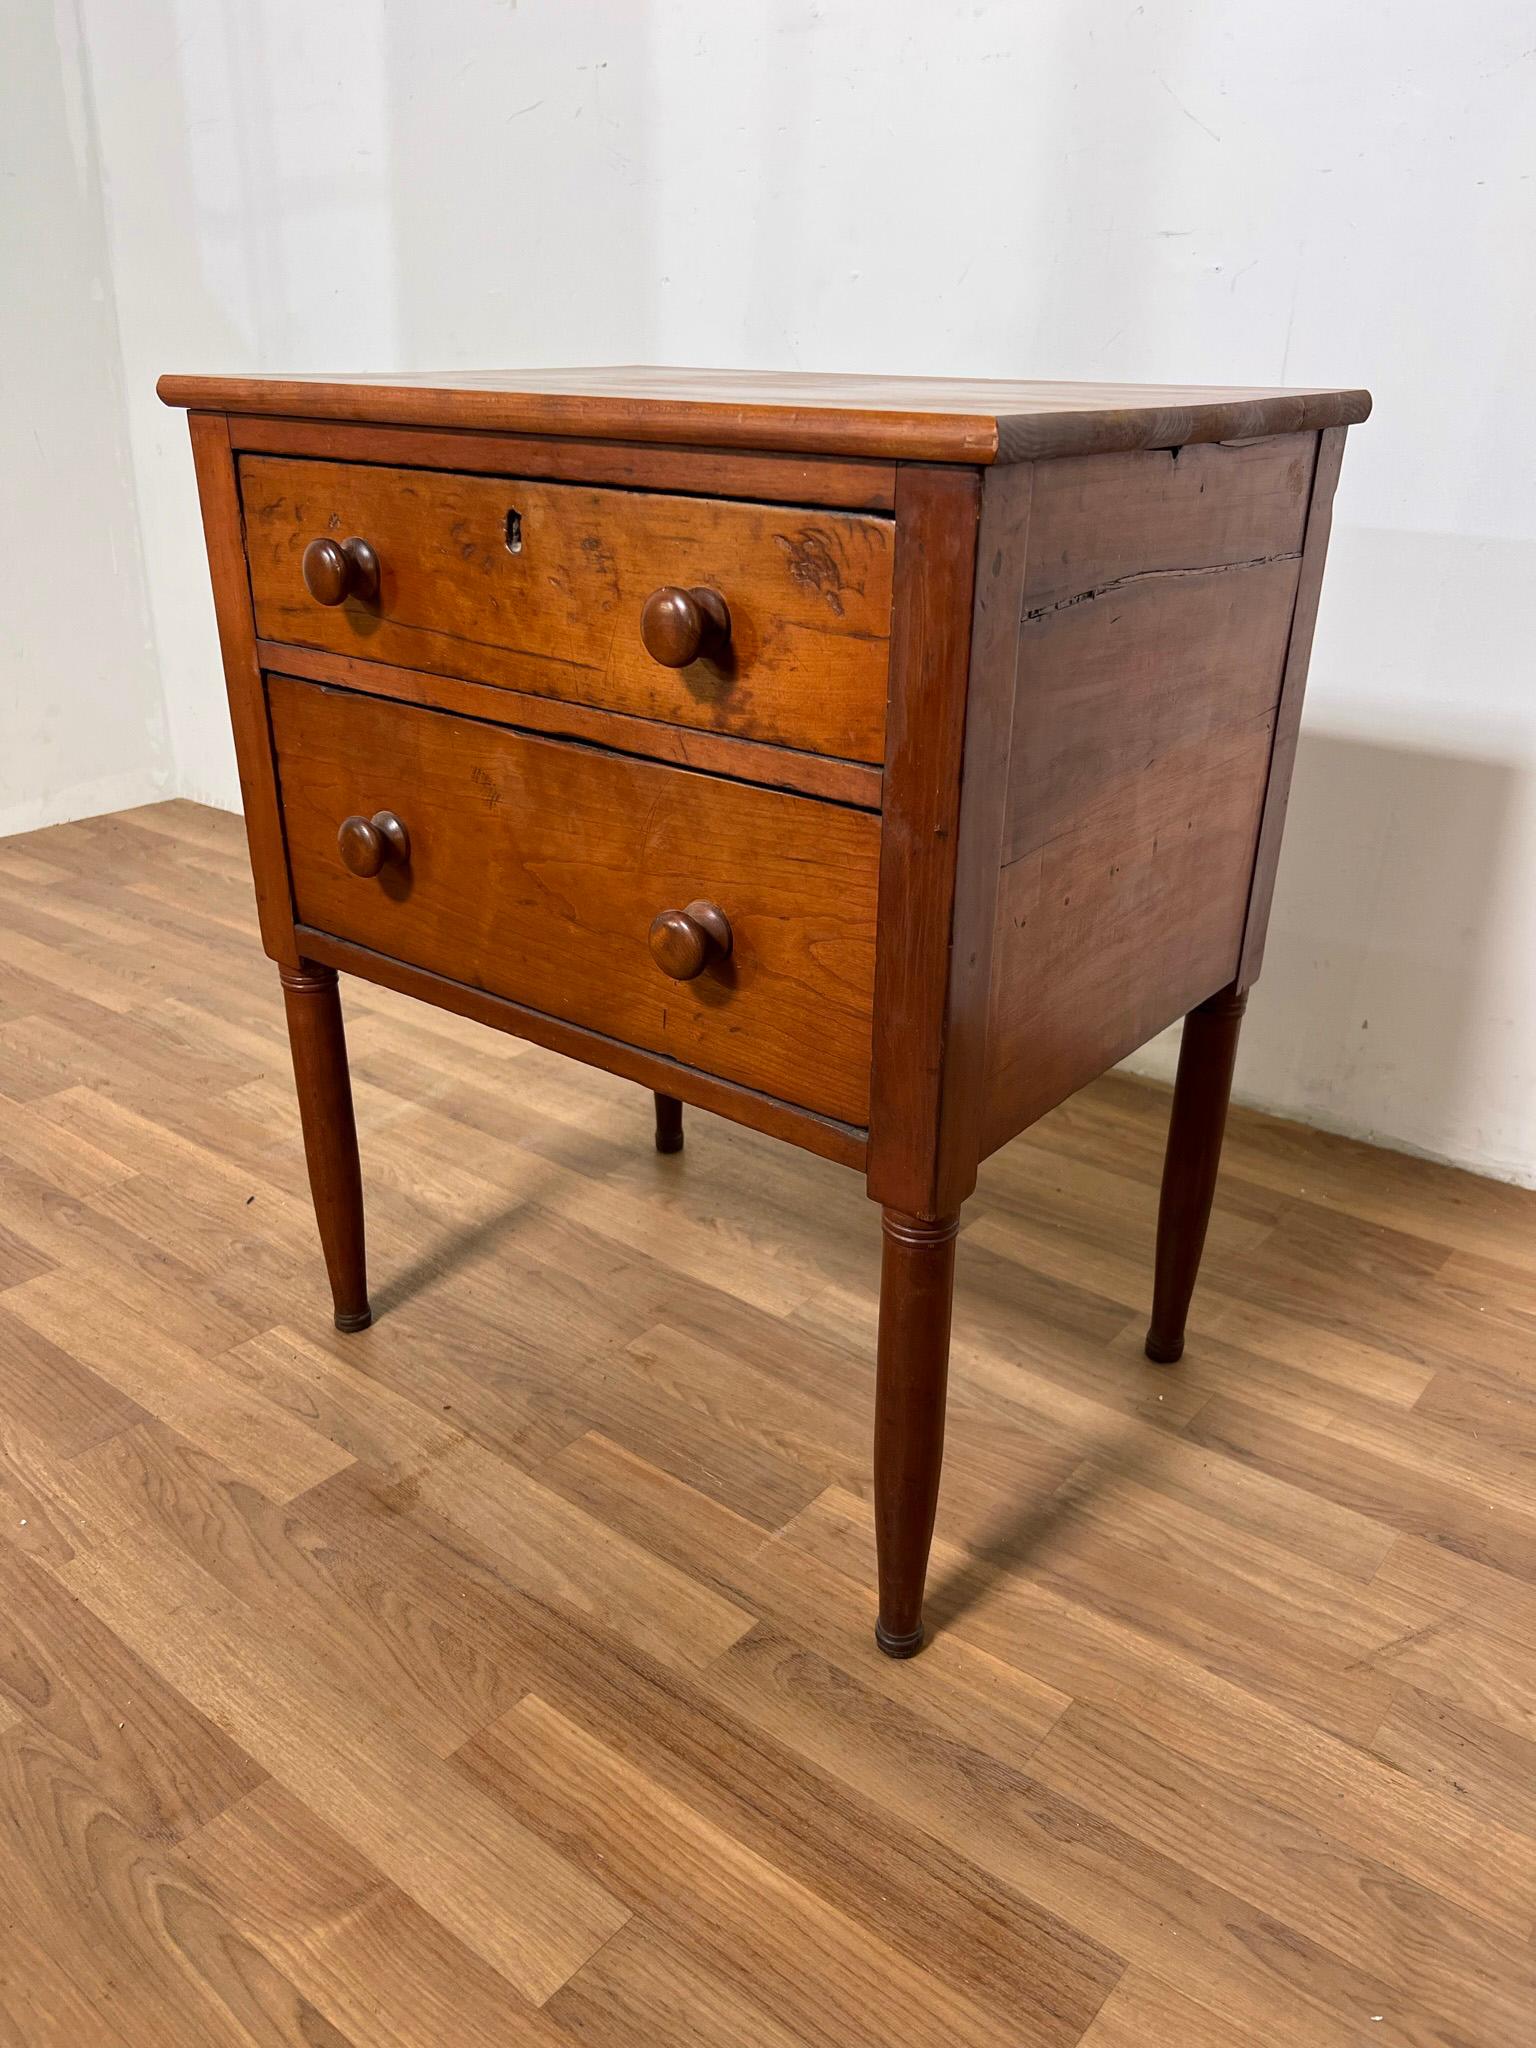 Authentic Shaker two drawer work stand in maple, circa early to mid-19th Century. This piece was crafted in the 